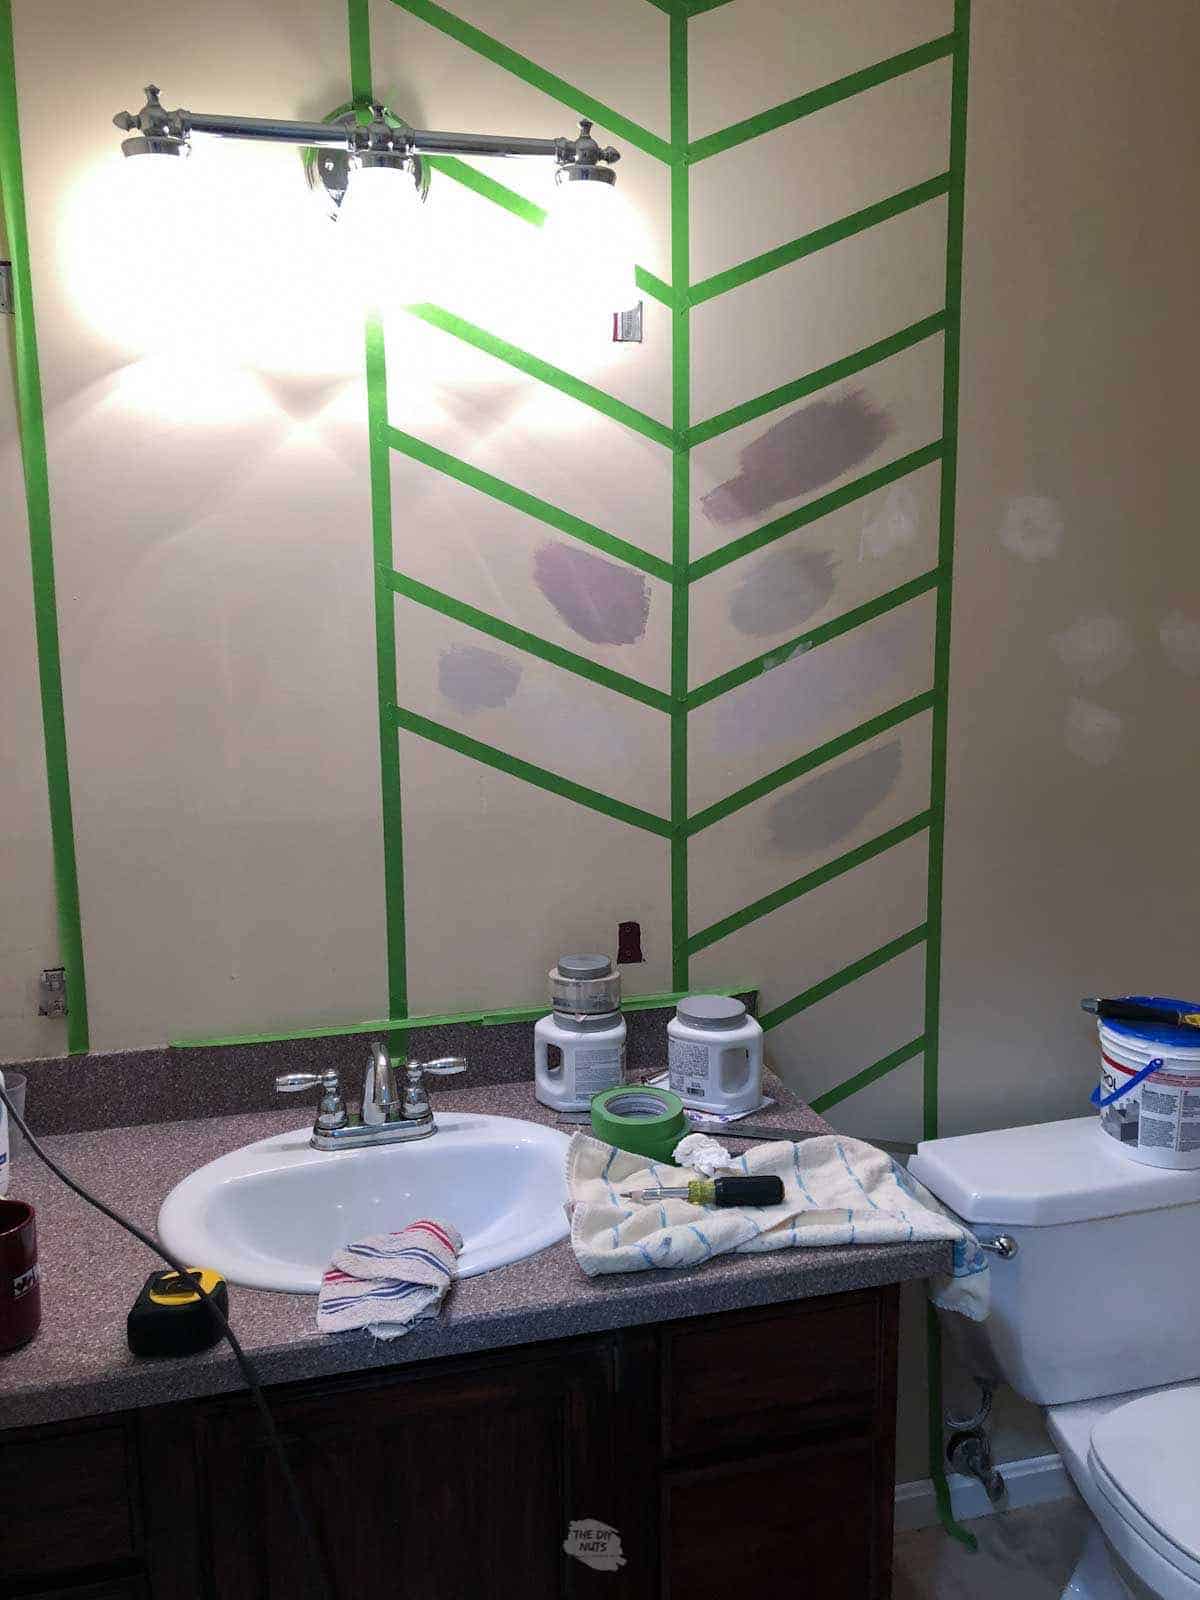 herringbone design tape on the bathroom wall with green tape and paint samples.